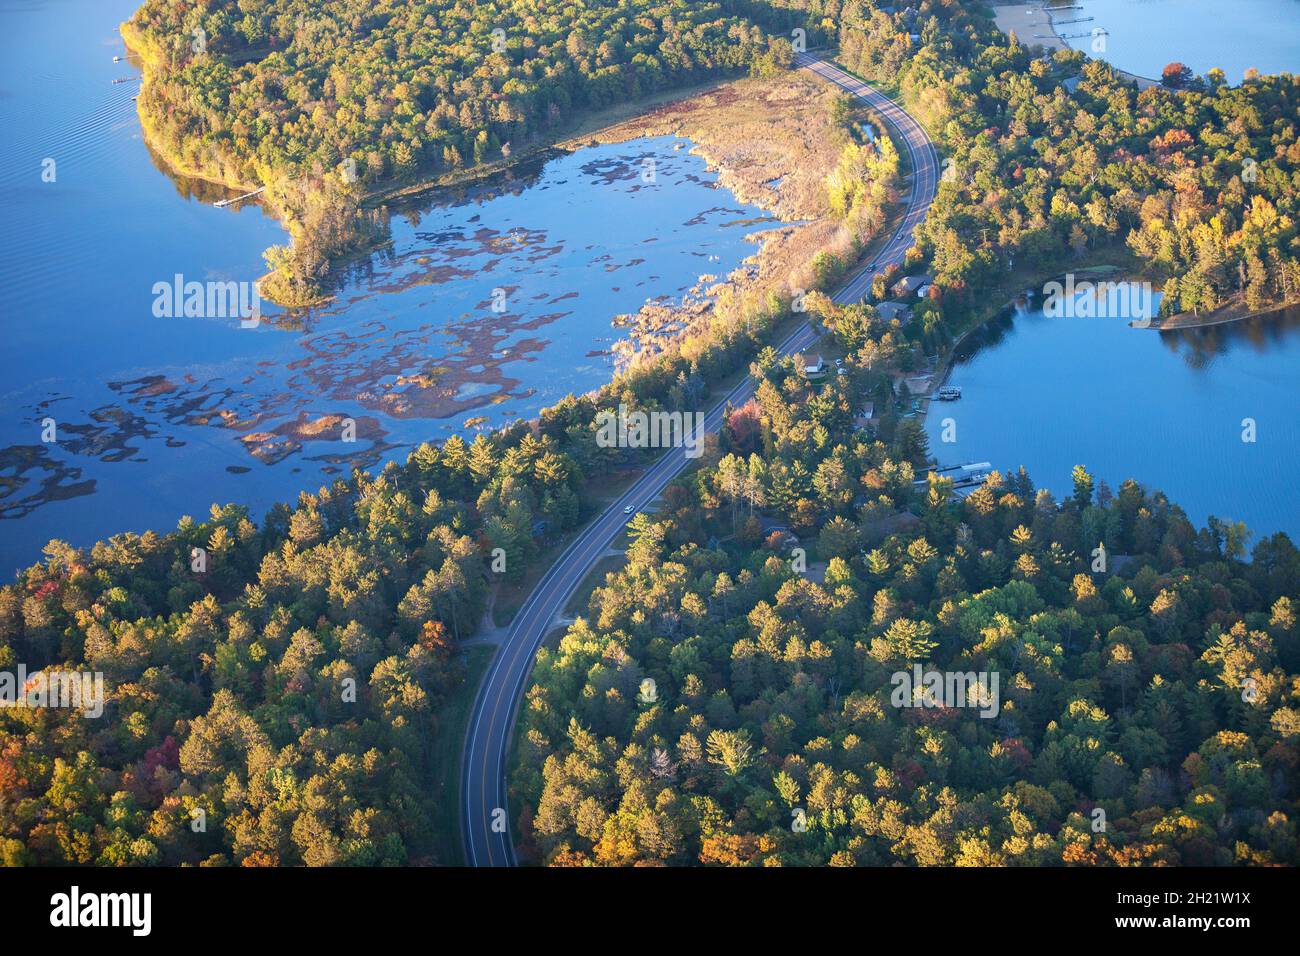 Aerial view of curving road between lakes and trees in autumn color in northern Minnesota Stock Photo